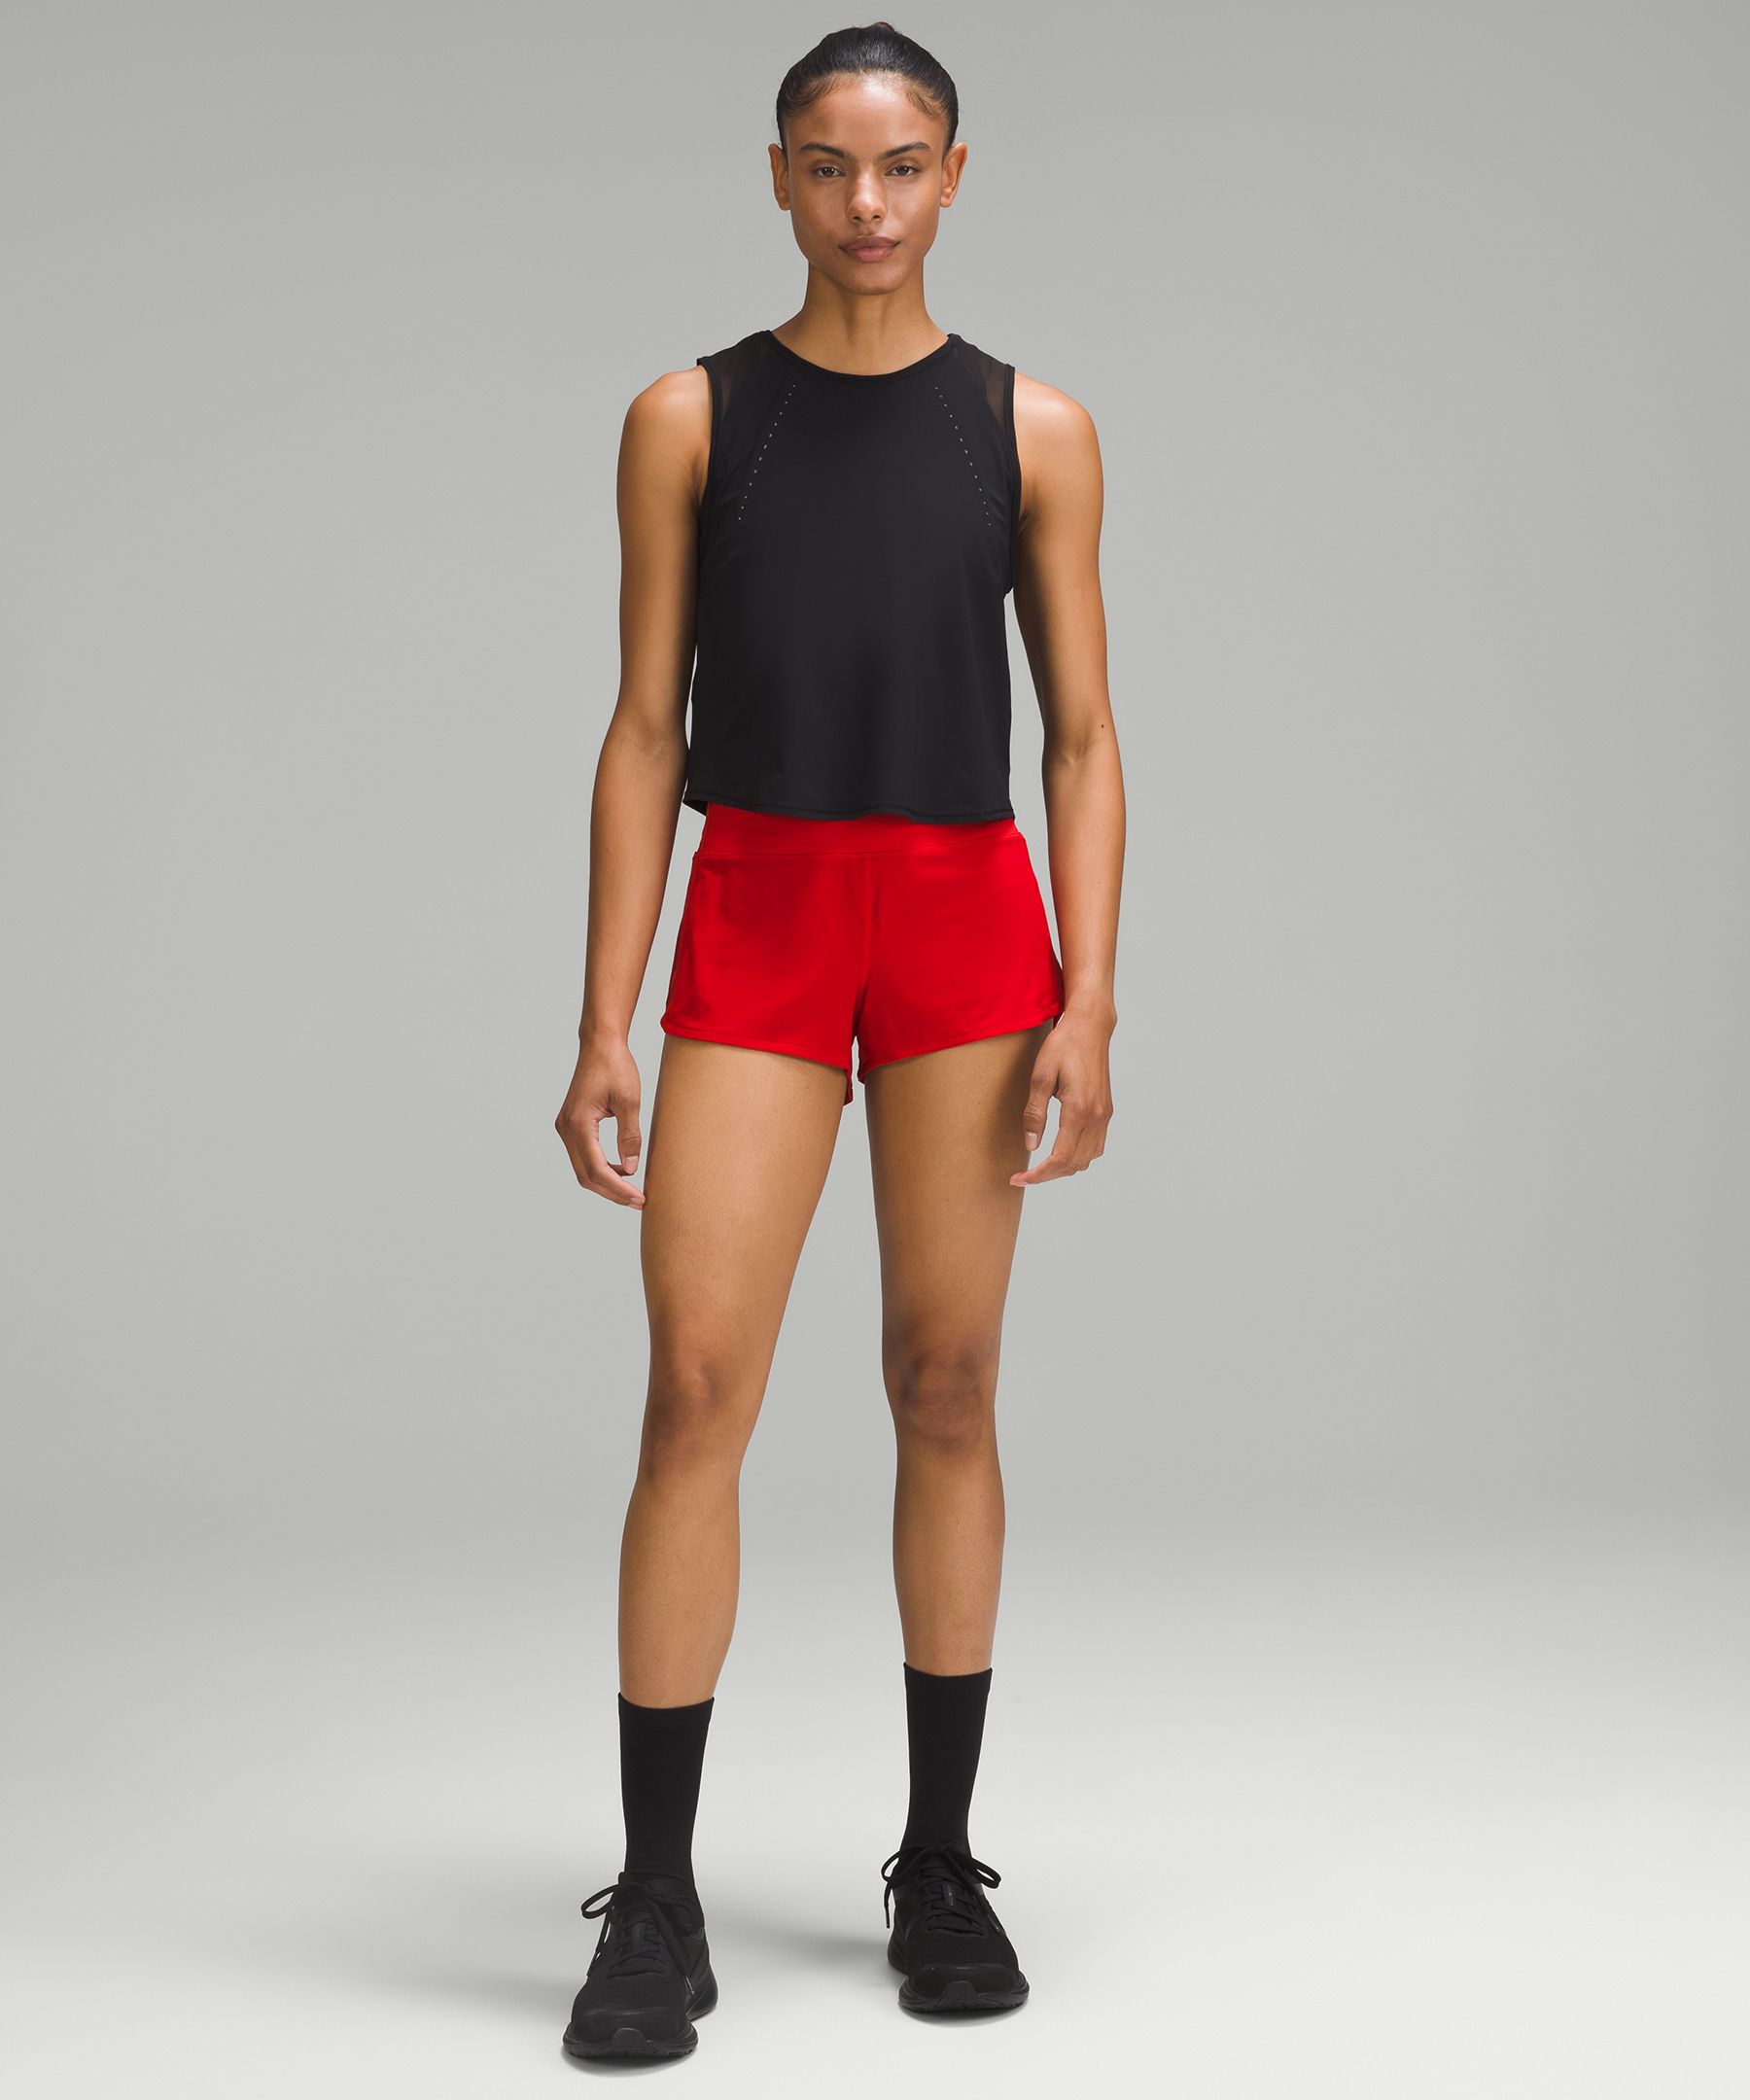 Red Sport Shorts - Lowes Menswear